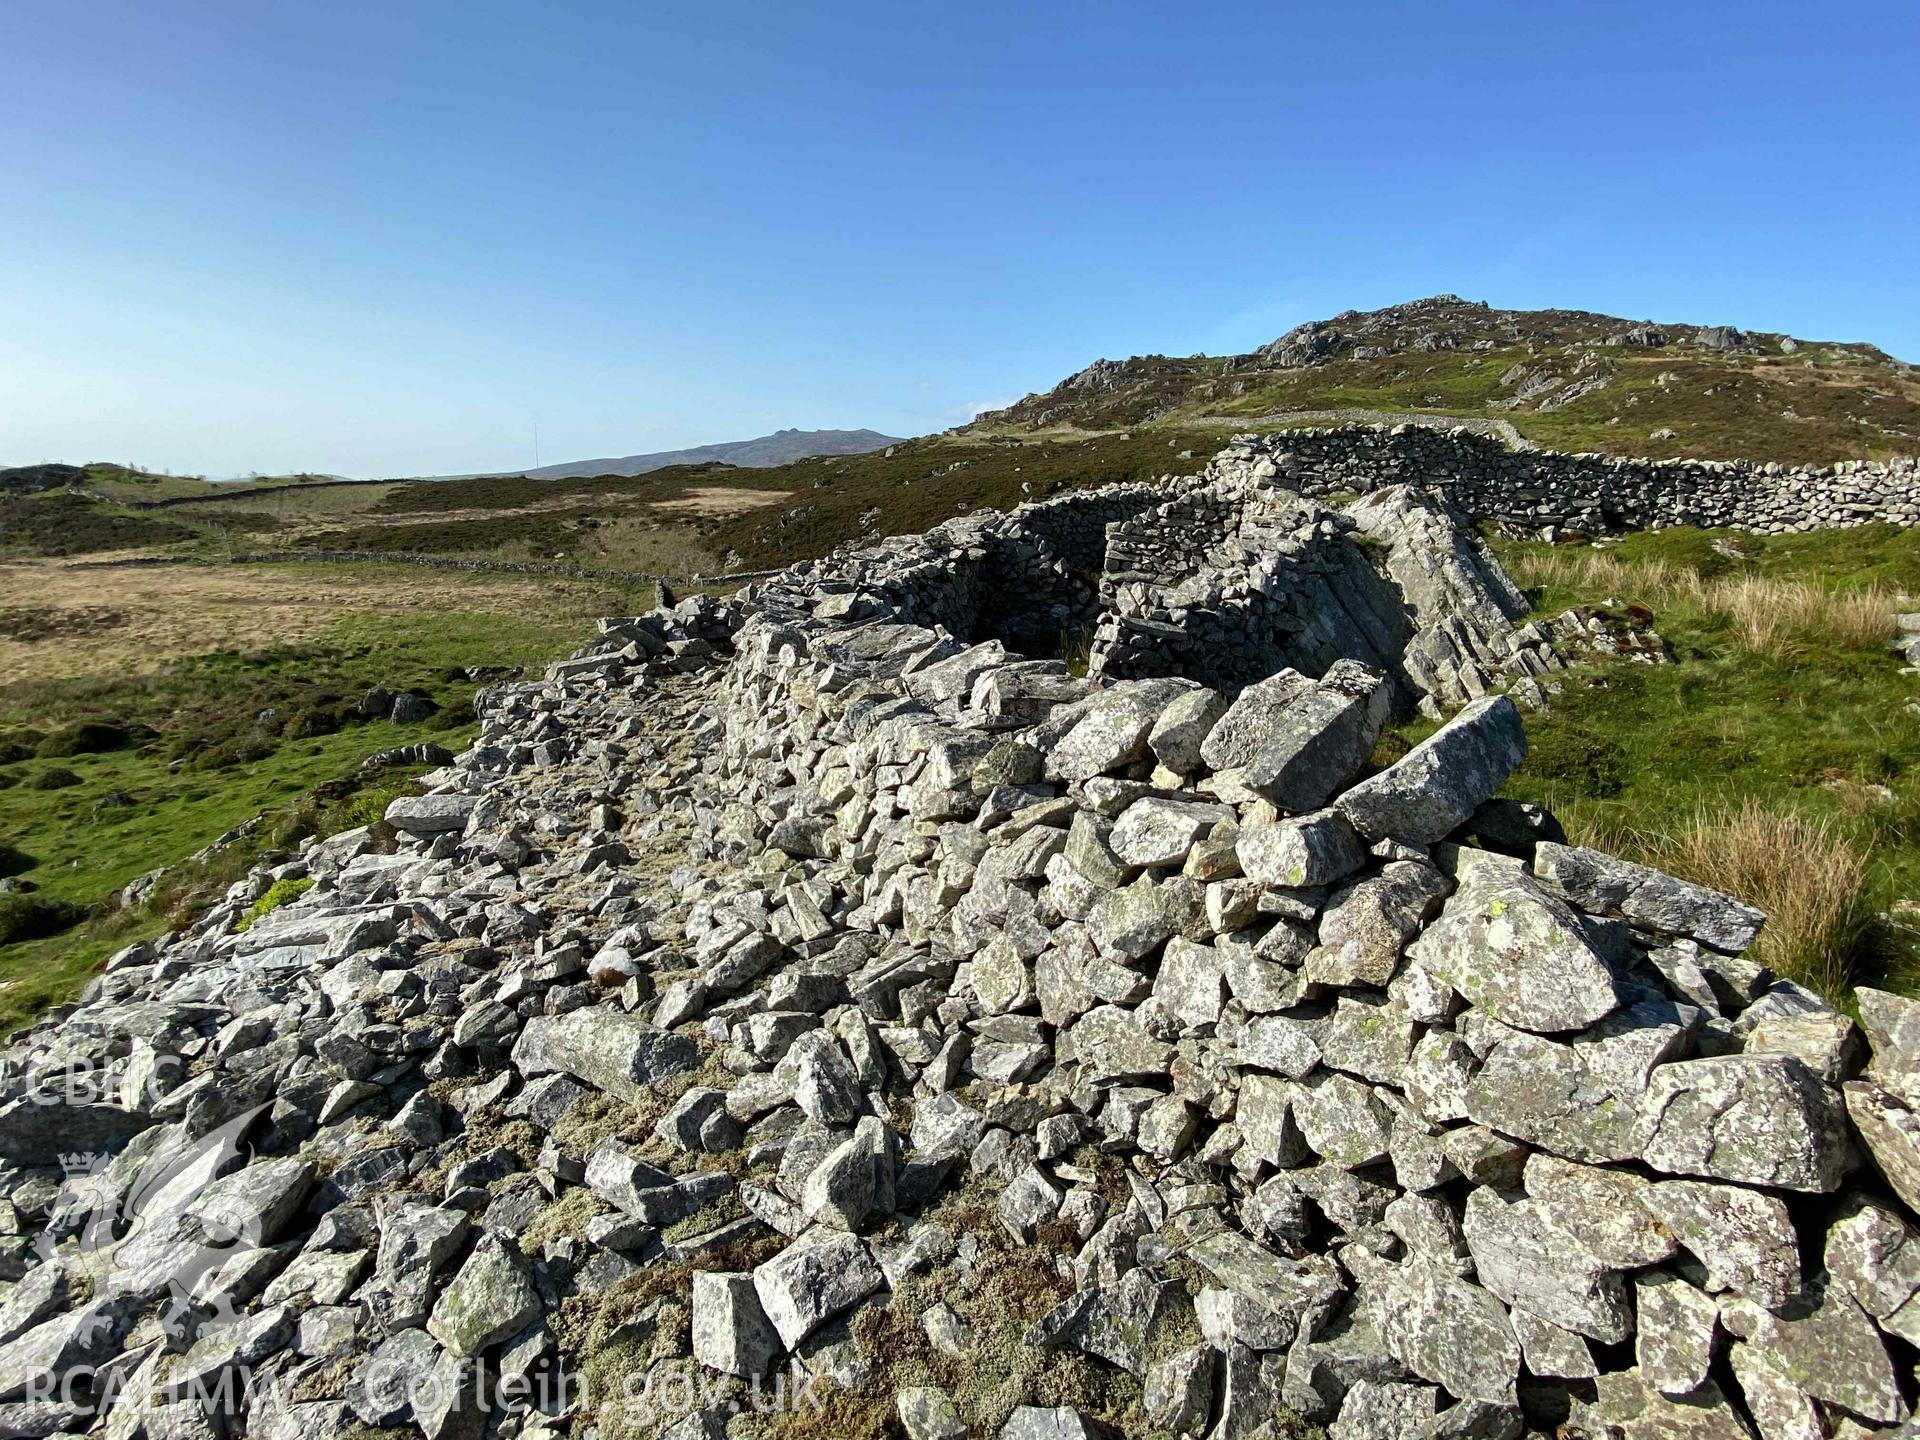 Digital photograph showing the west rampart of Castell Caerau, produced by Paul Davis in 2023